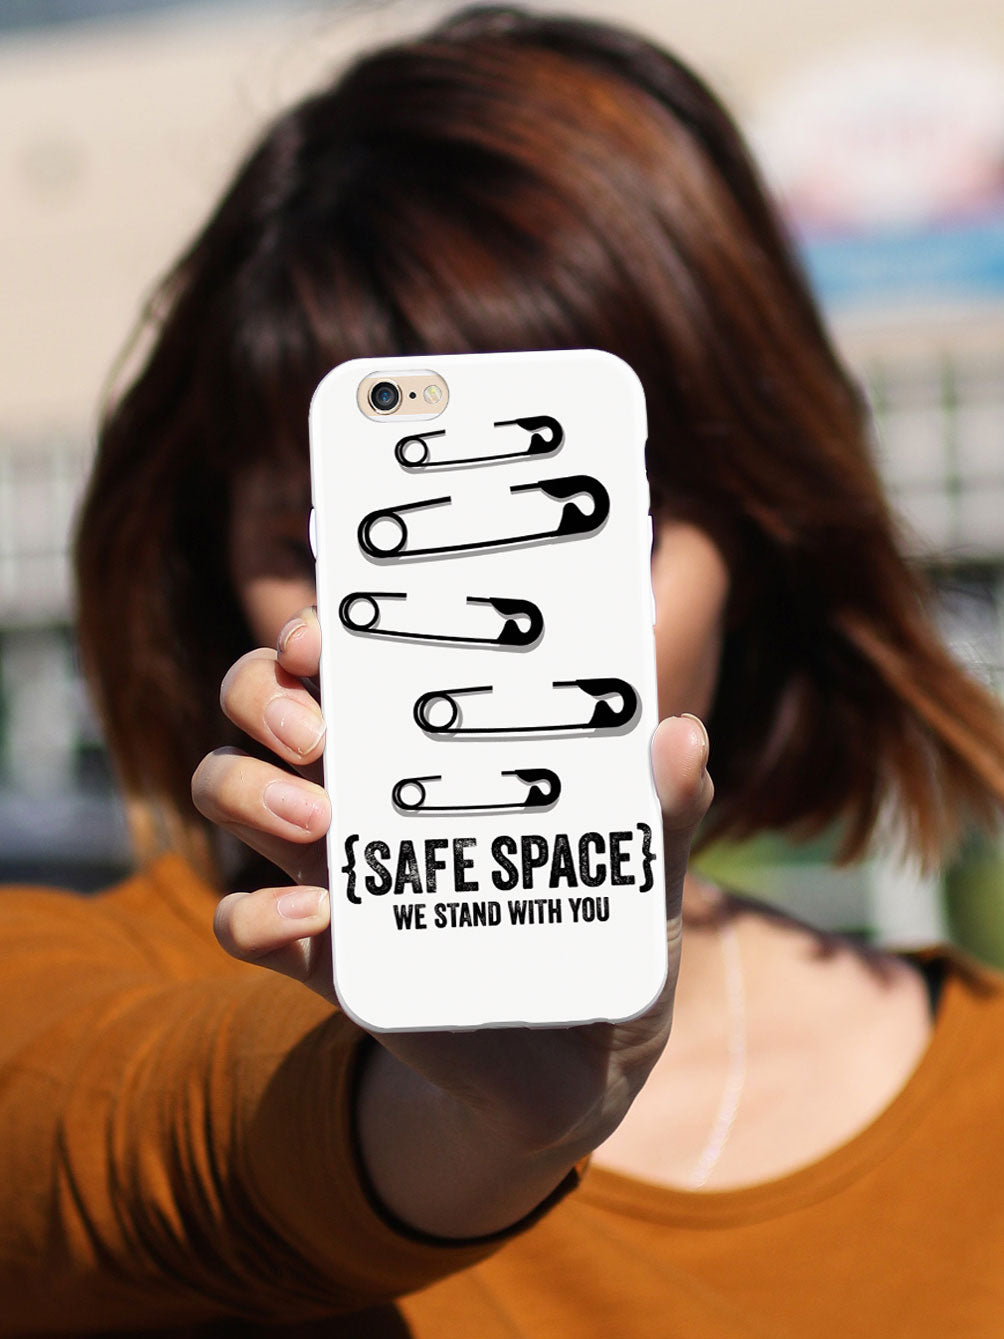 Safe Space - We Stand With You - White Case